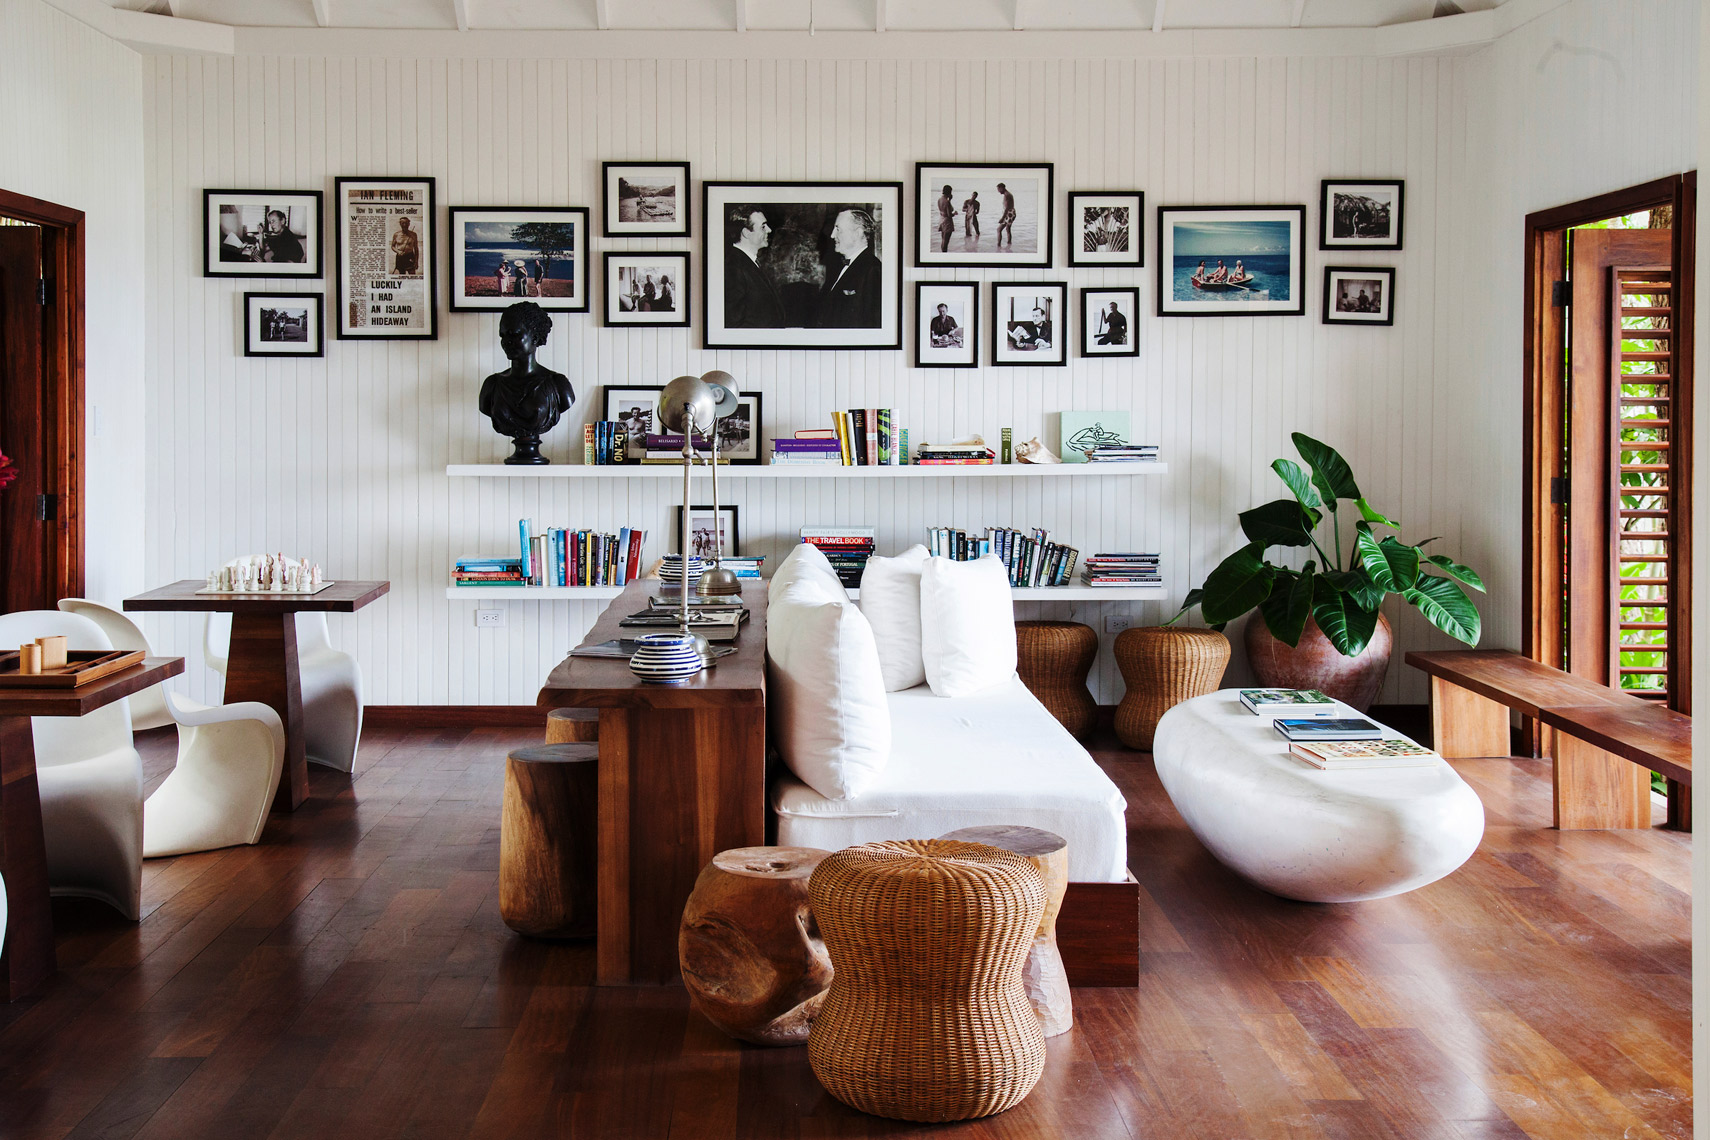 JAMAICA, Oracabessa. The lobby with photos of Ian Fleming and James Bond at the Goldeneye Hotel and Resort.